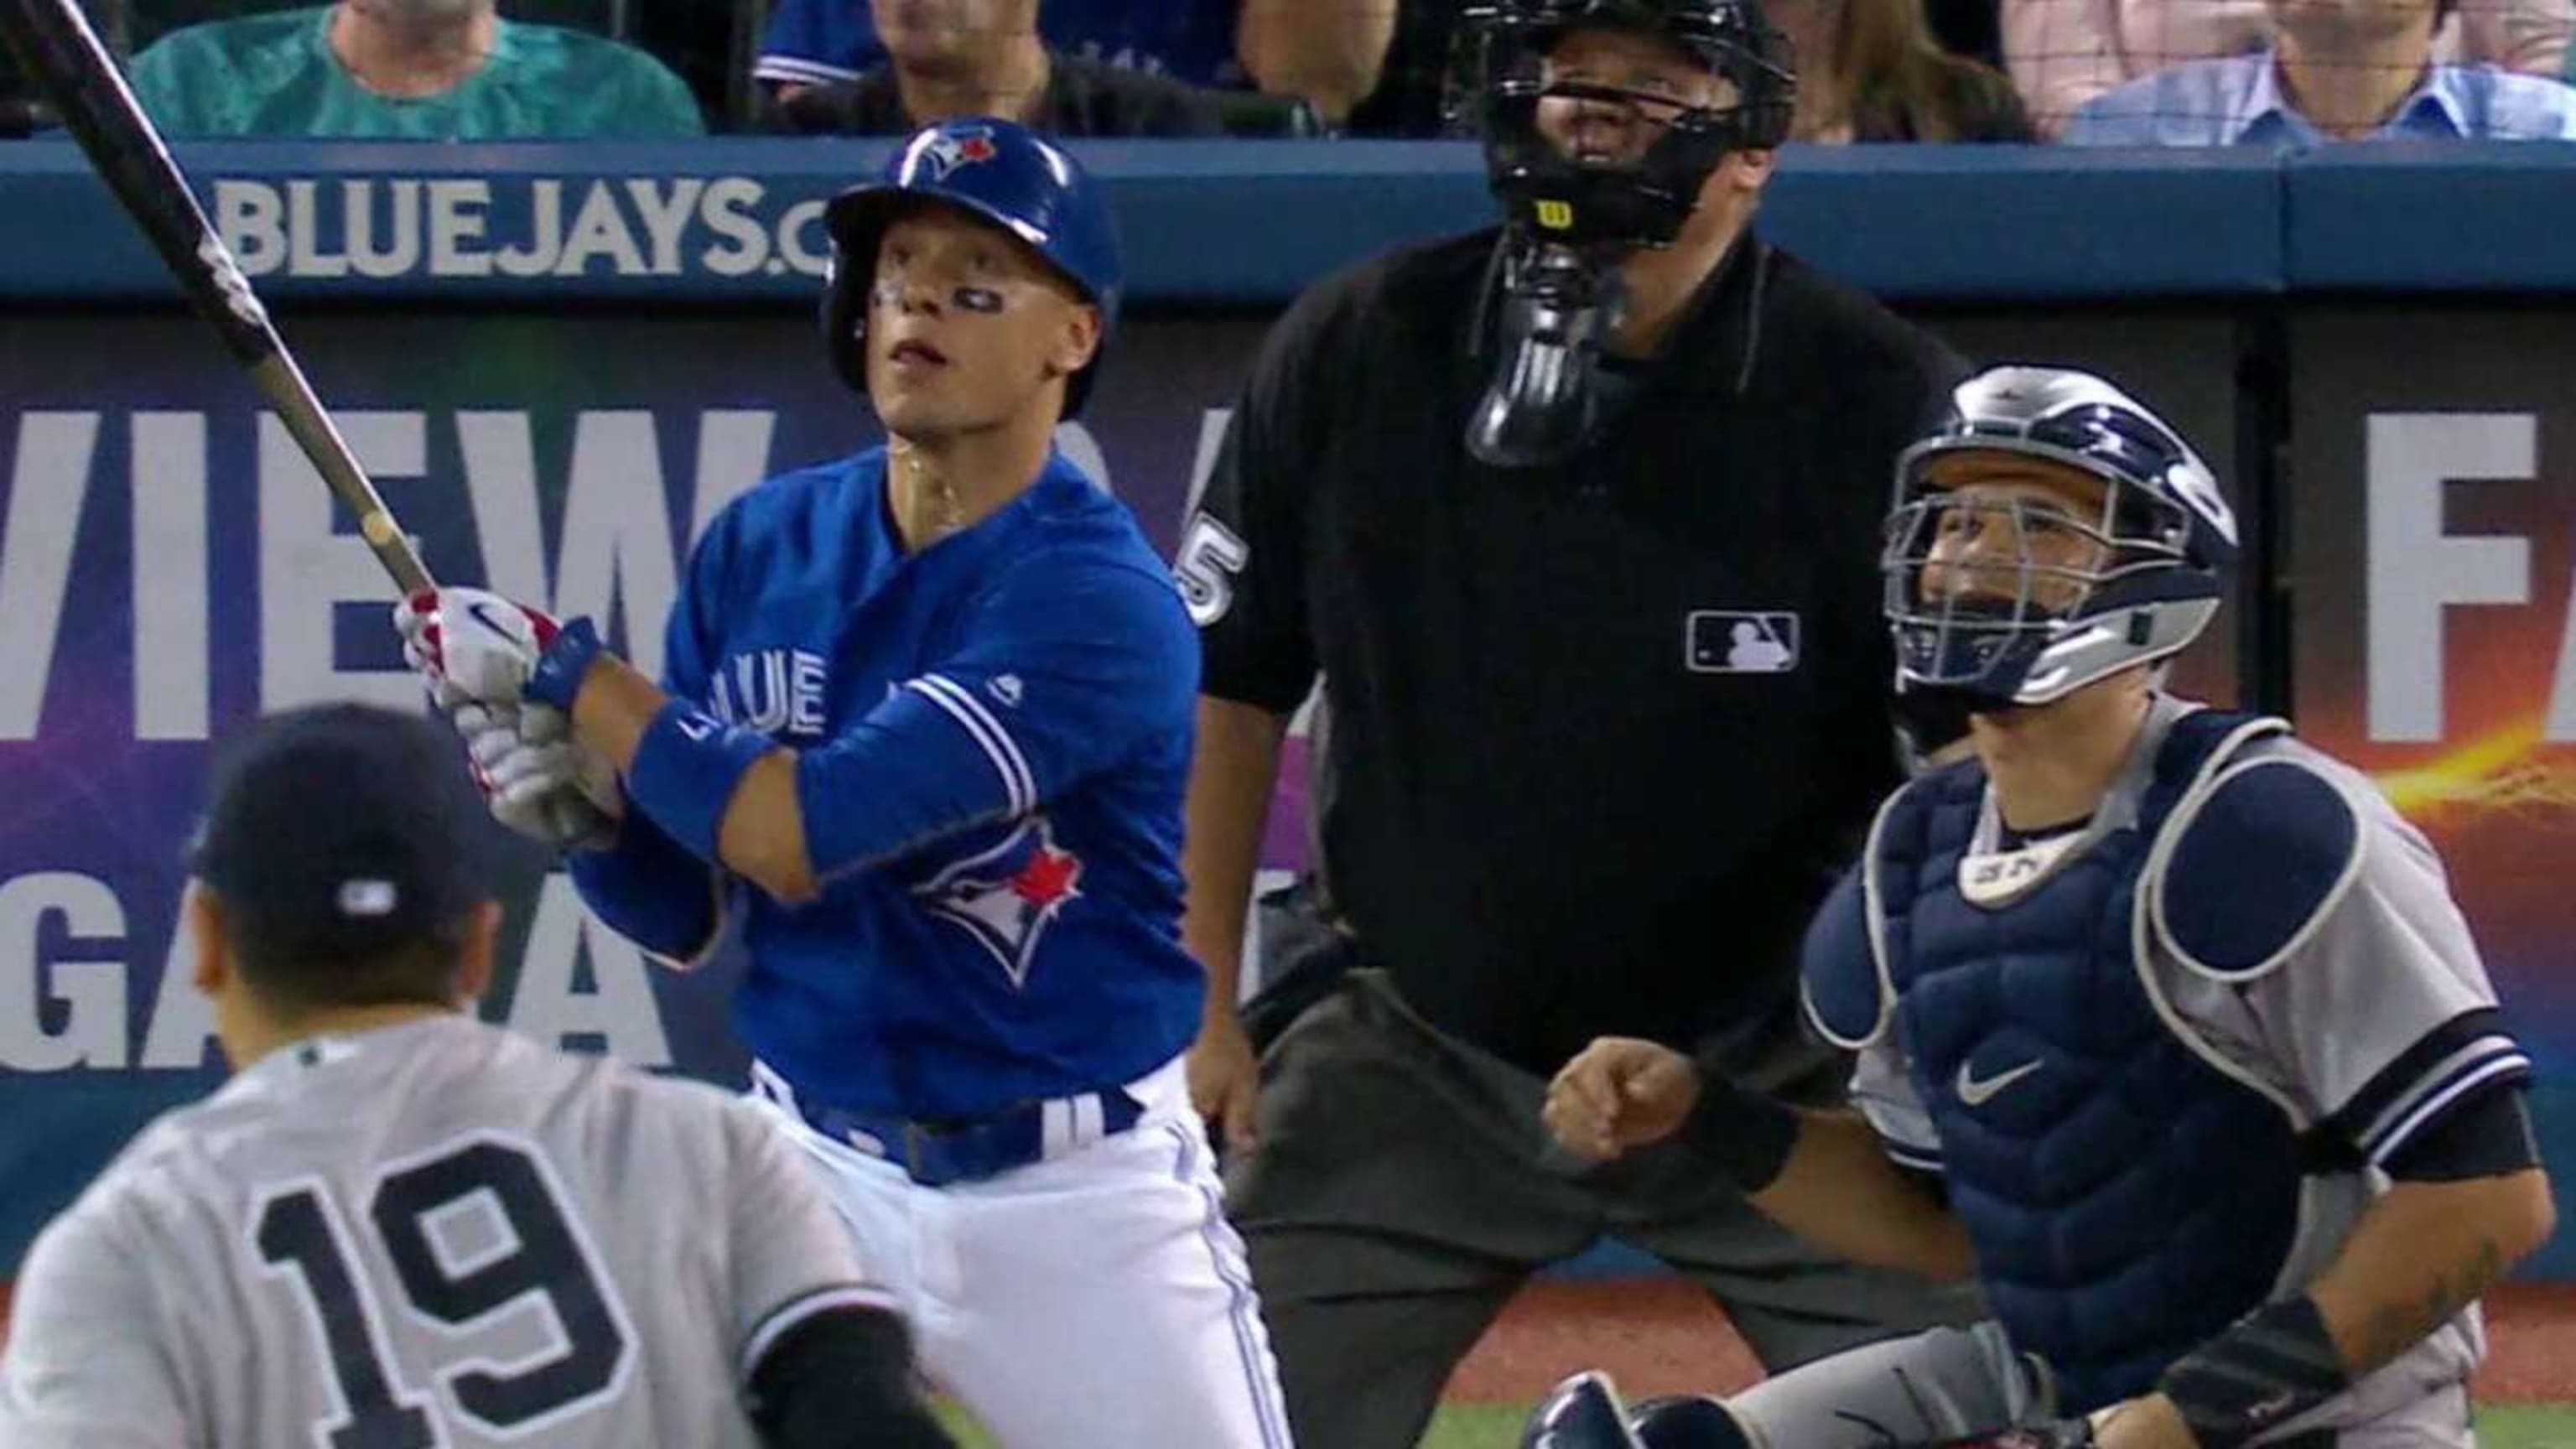 Blue Jays' Ryan Goins makes incredible plays his routine